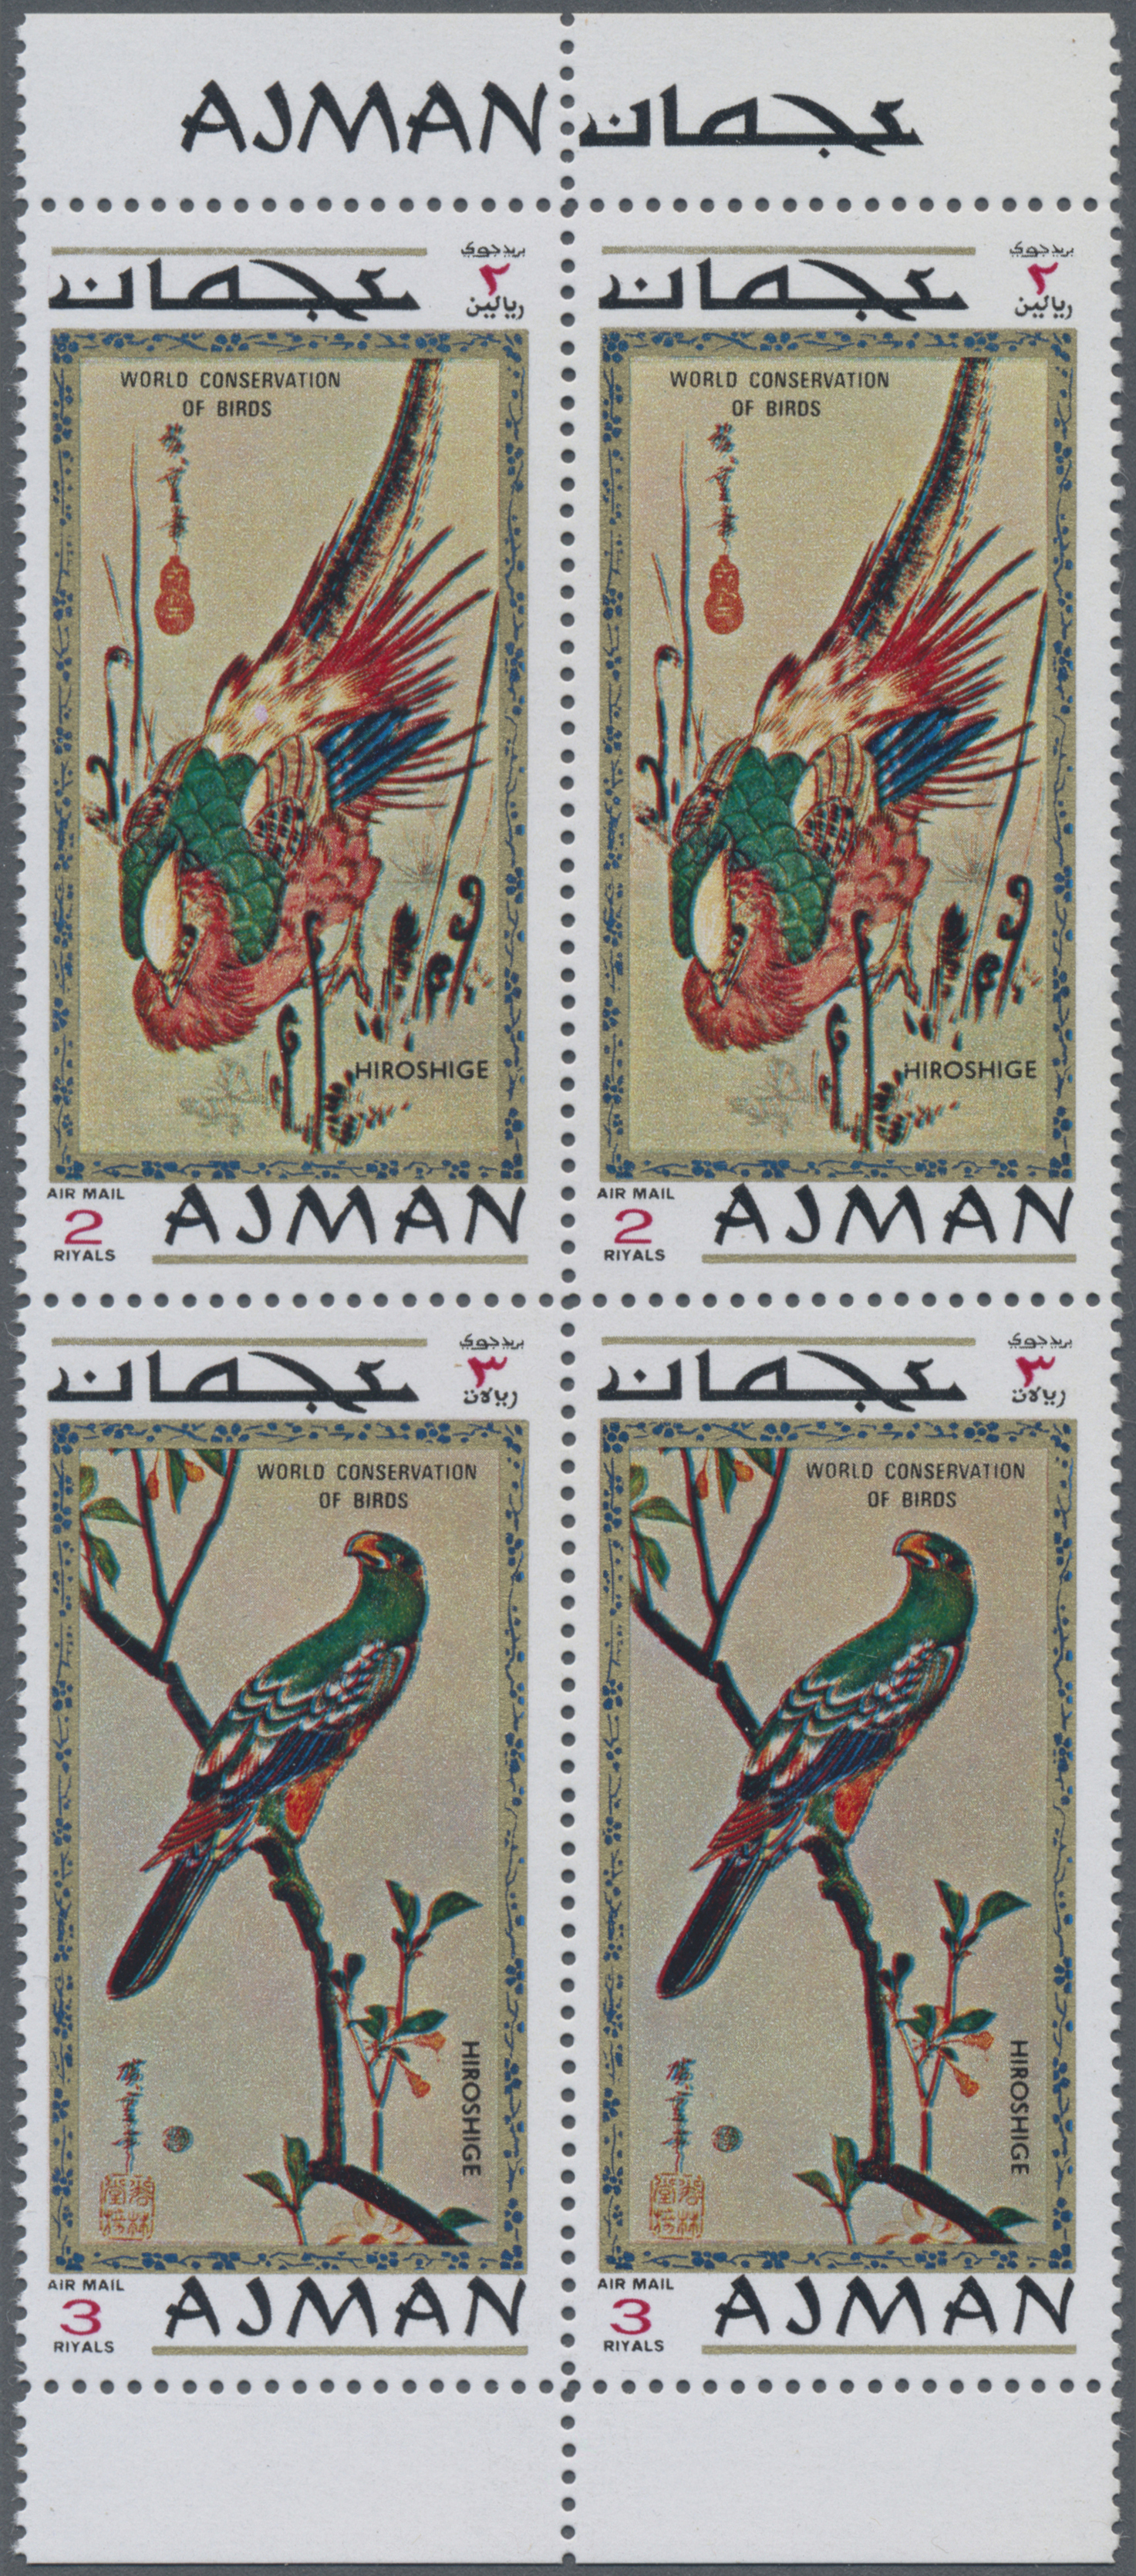 Lot 16009 - adschman / ajman  -  Auktionshaus Christoph Gärtner GmbH & Co. KG Sale #49 Collections Overseas, Thematics, Europe, Germany/Estates